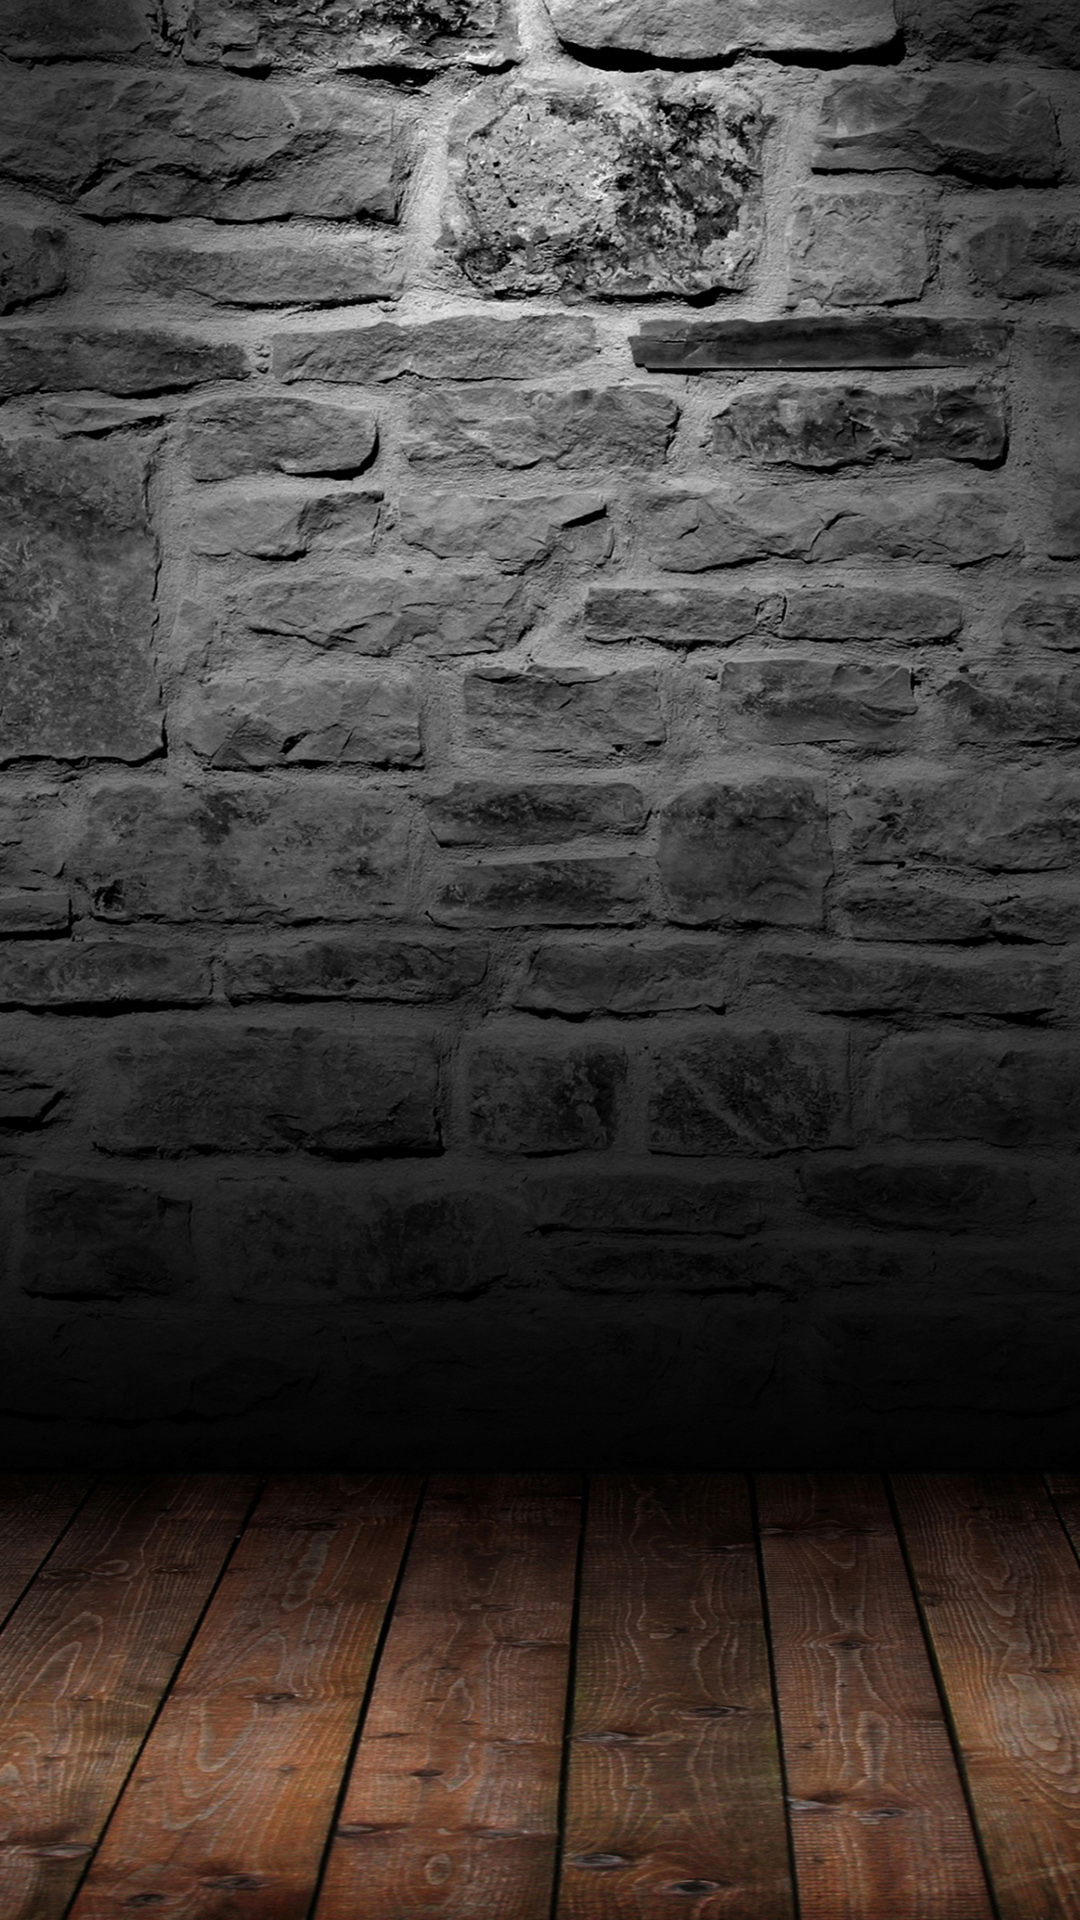 Wall of rocks - android wallpapers free download